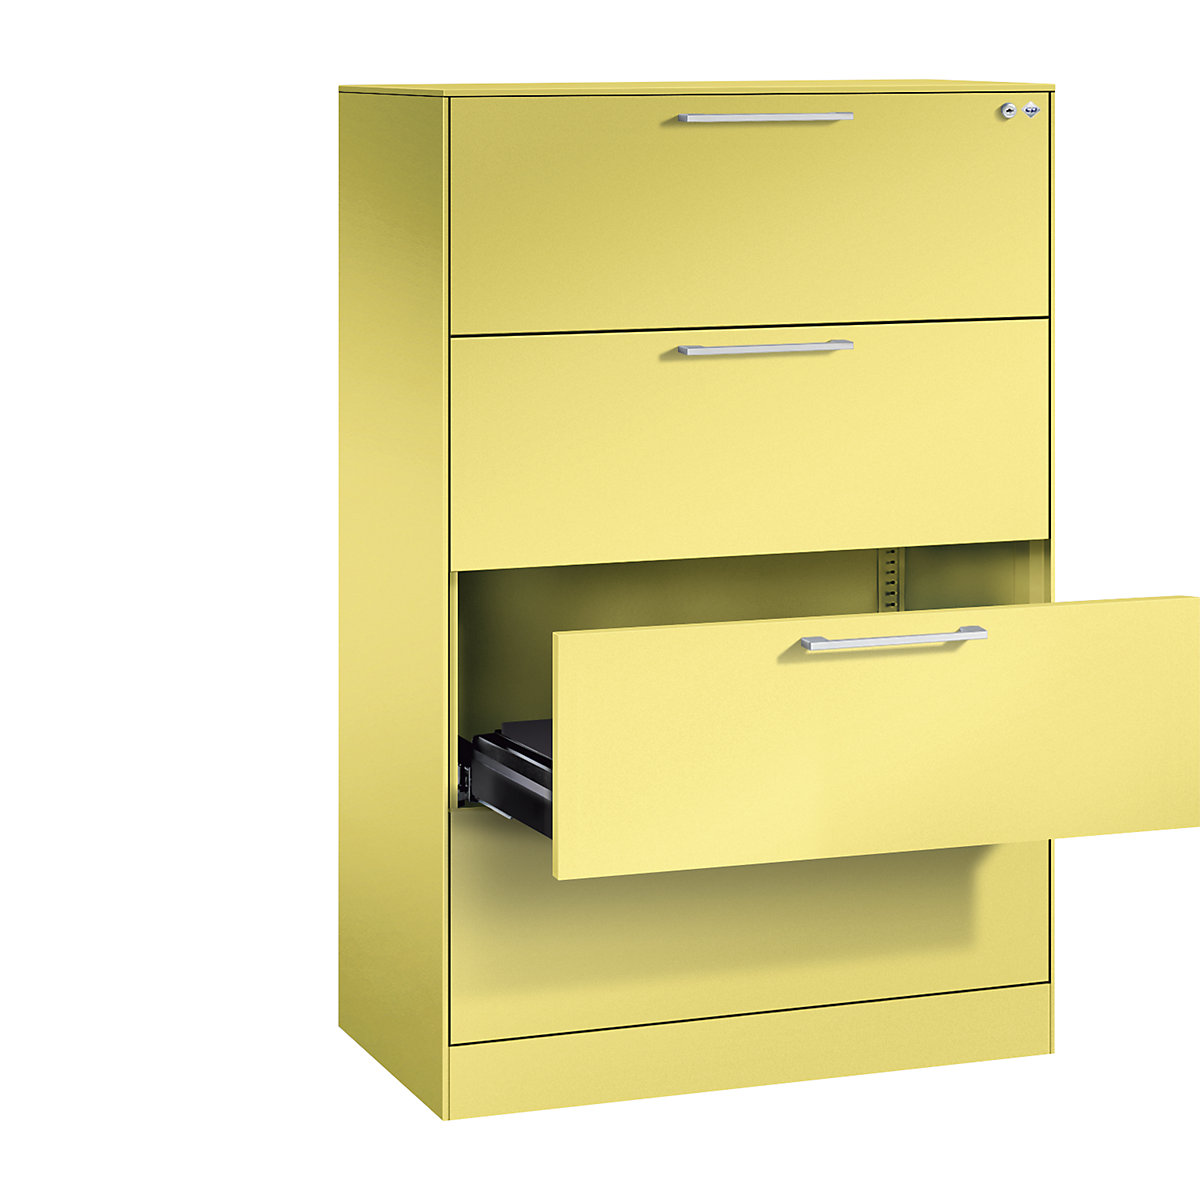 ASISTO card file cabinet – C+P, height 1292 mm, with 4 drawers, A4 landscape, sulphur yellow/sulphur yellow-4